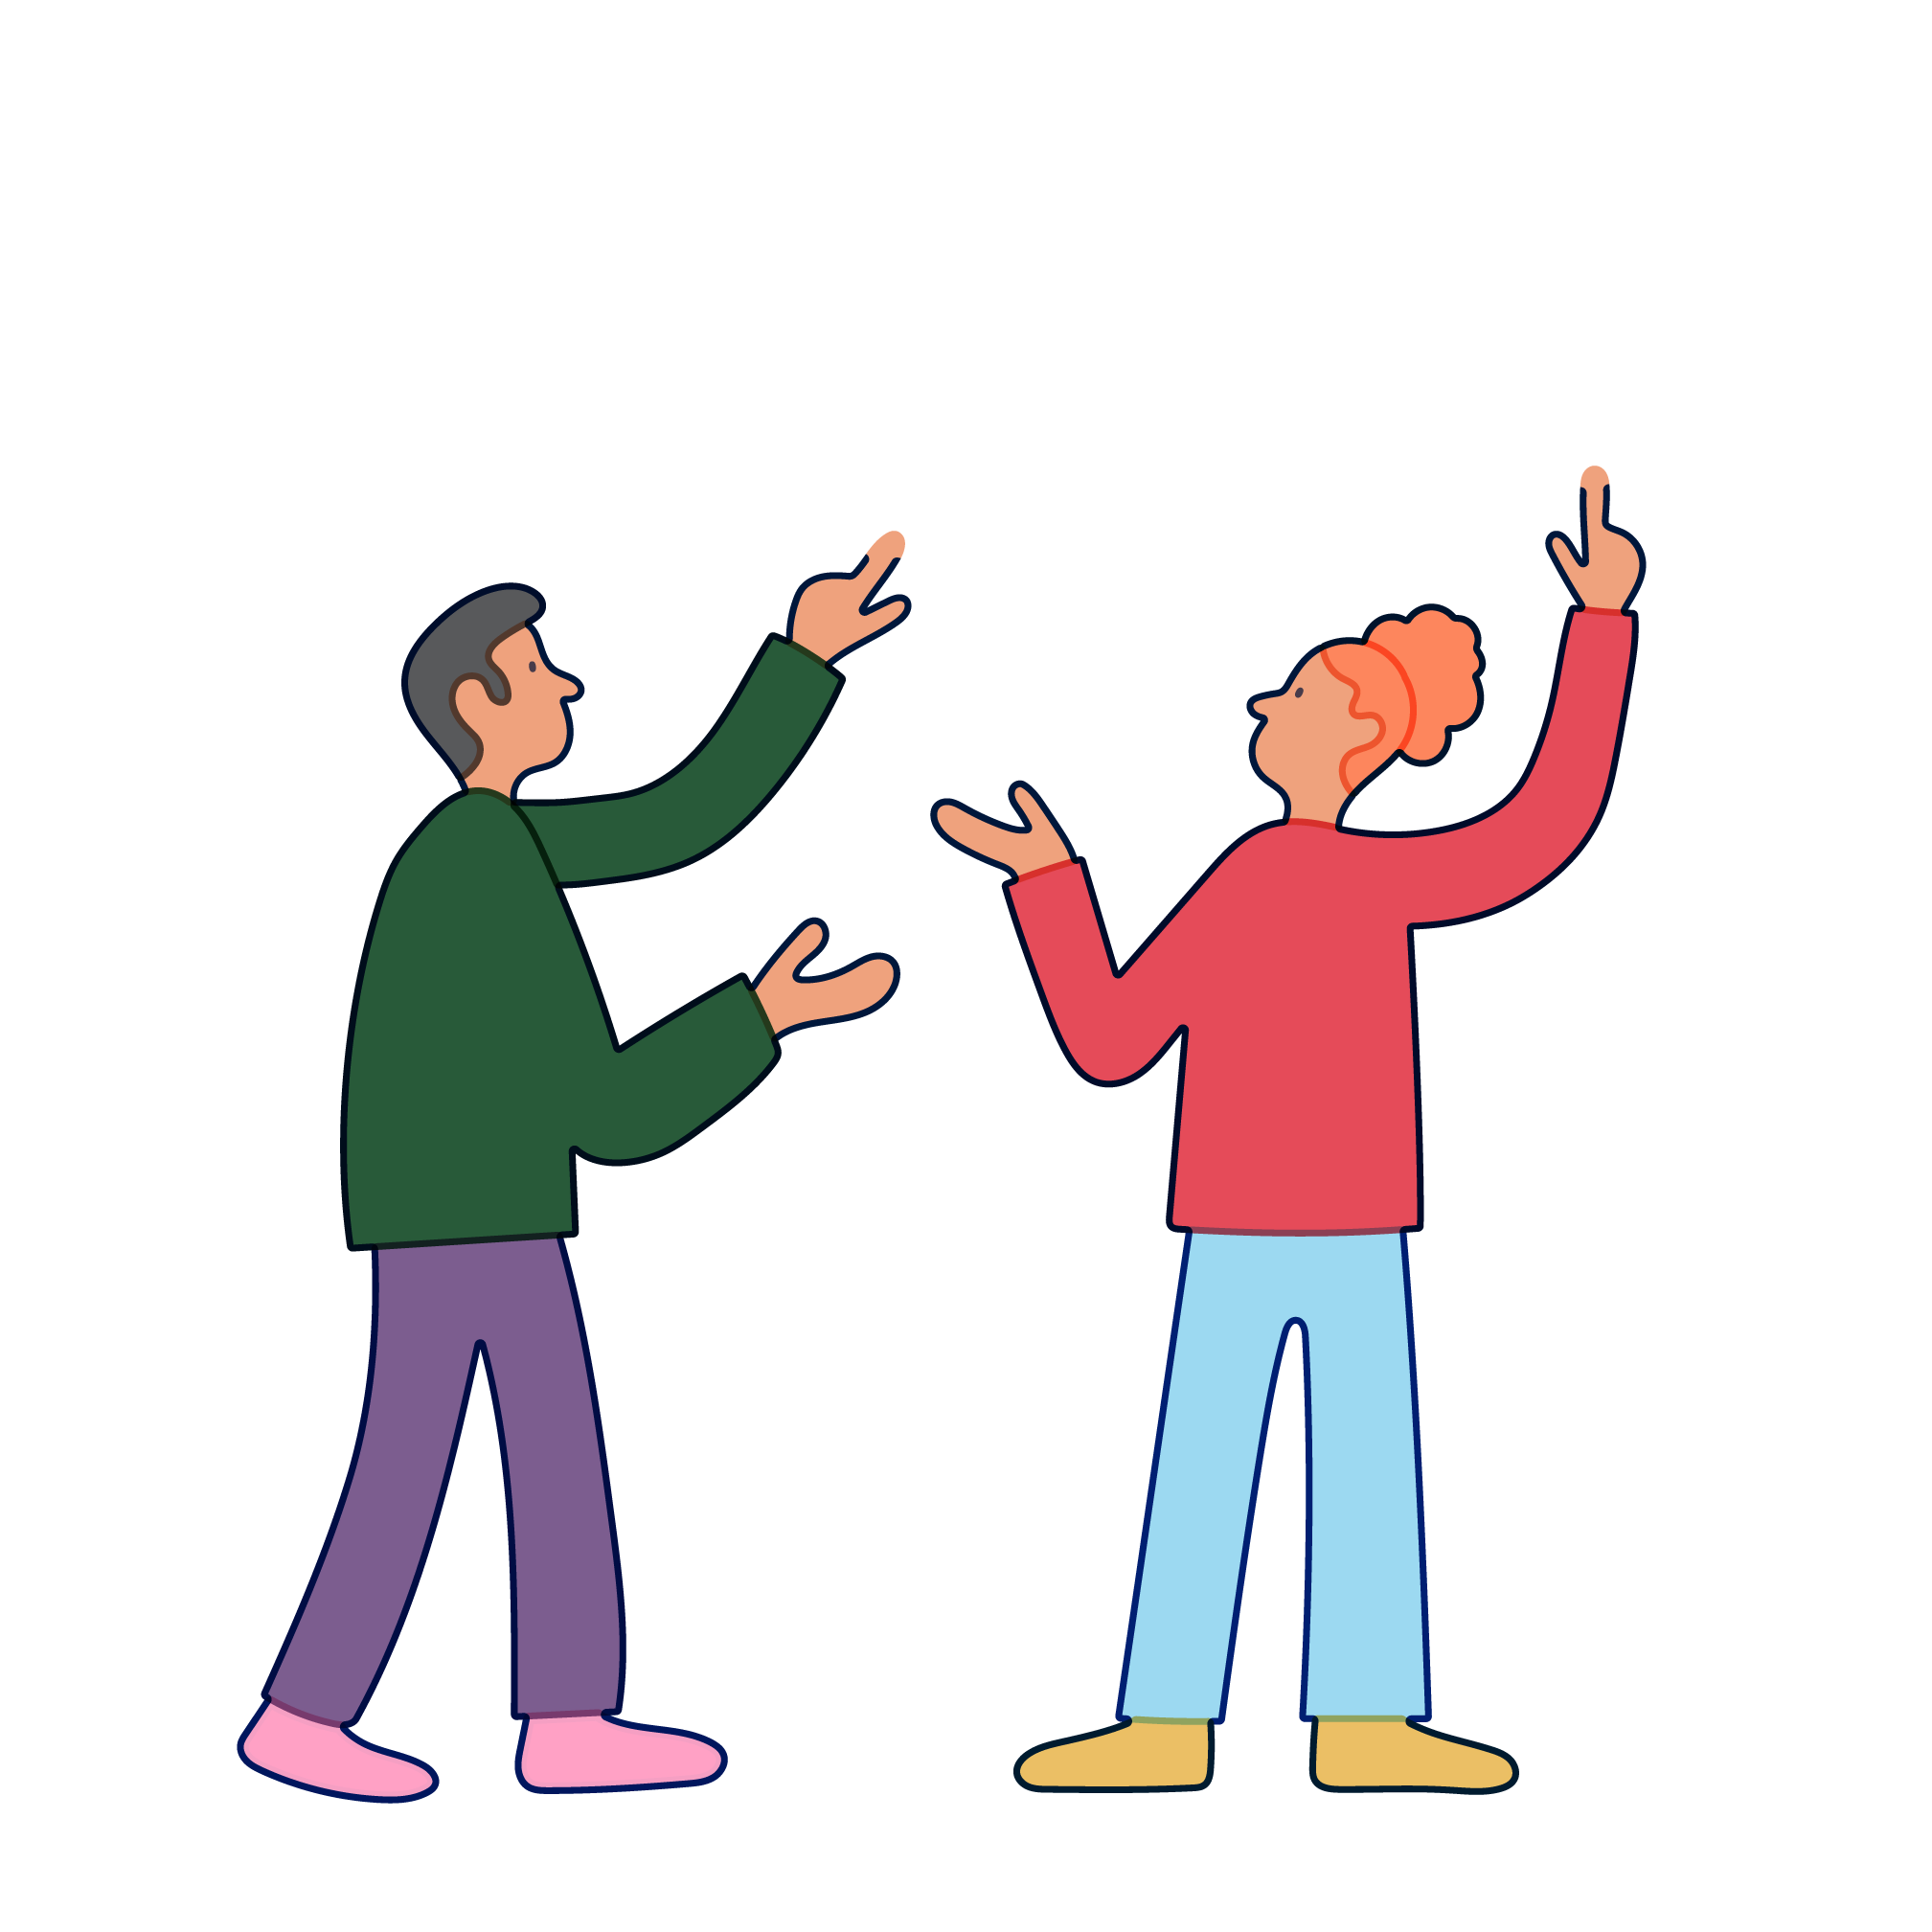 Two people chat animatedly with speech bubbles over their heads.